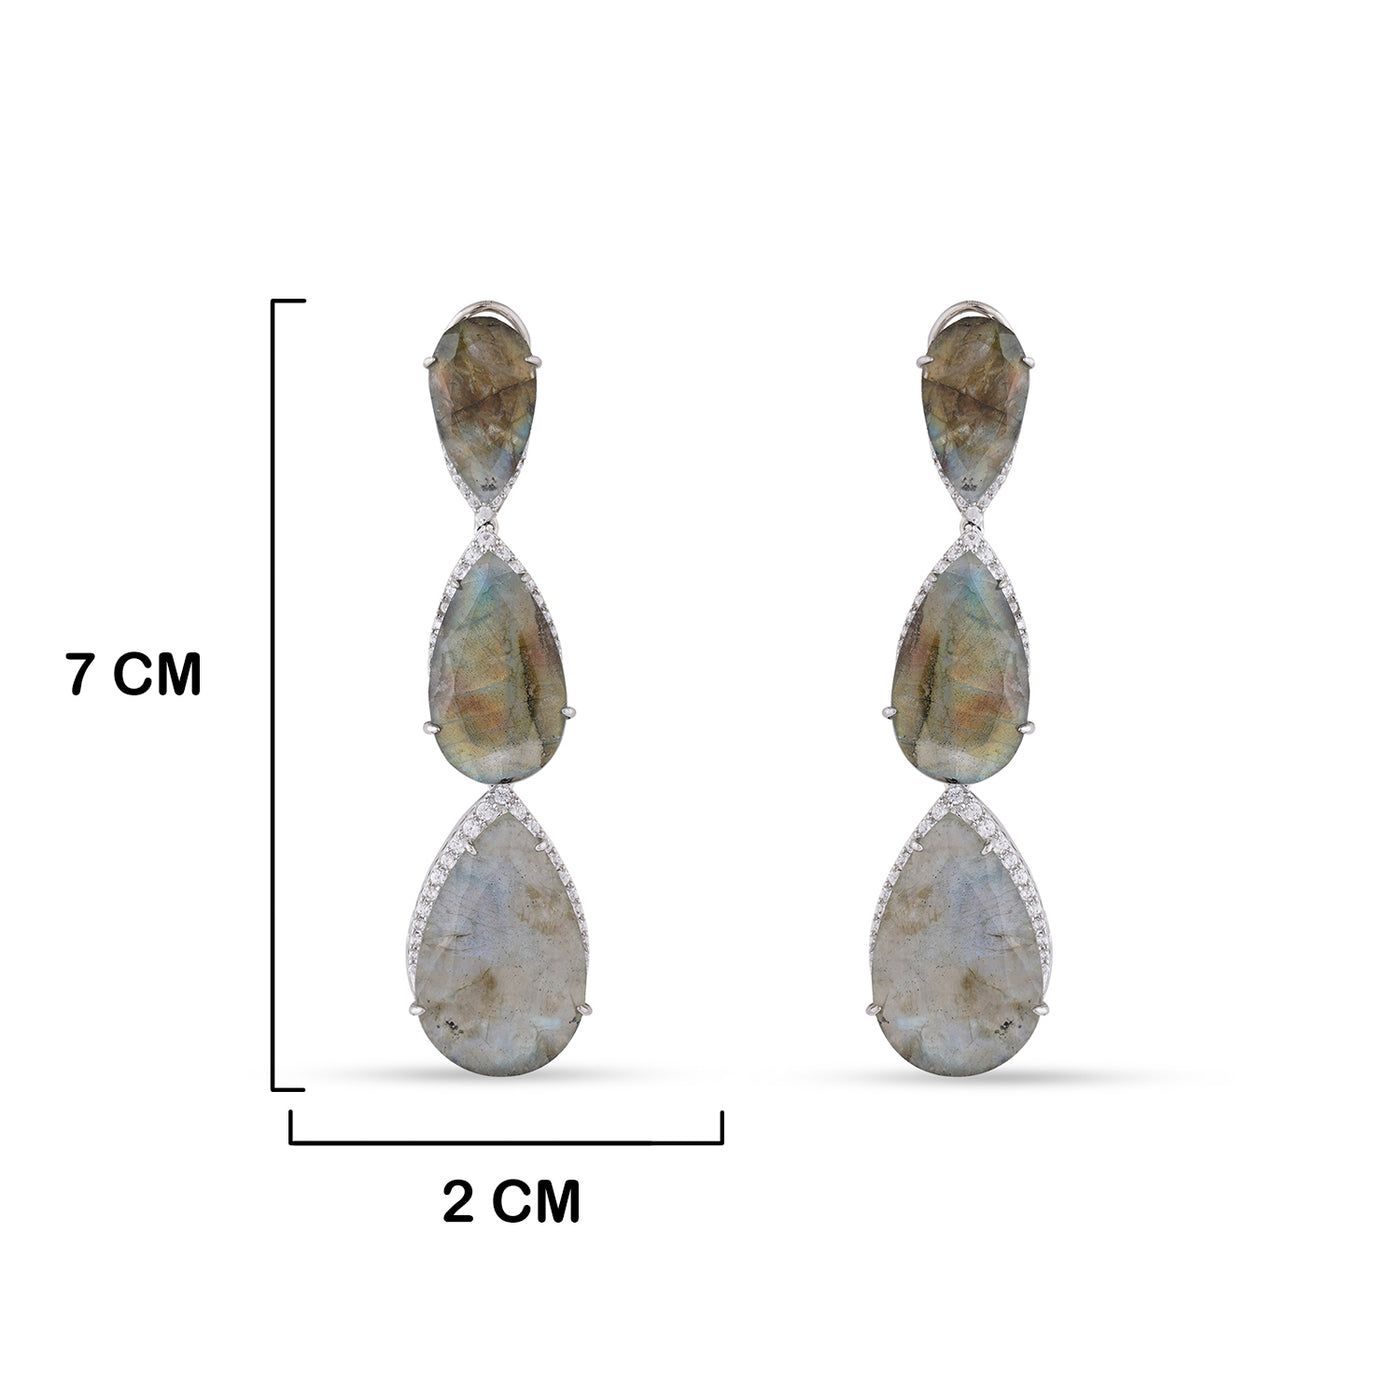 Labradorite Stoned CZ Dangle Earrings with measurements in cm. 7cm by 2cm.